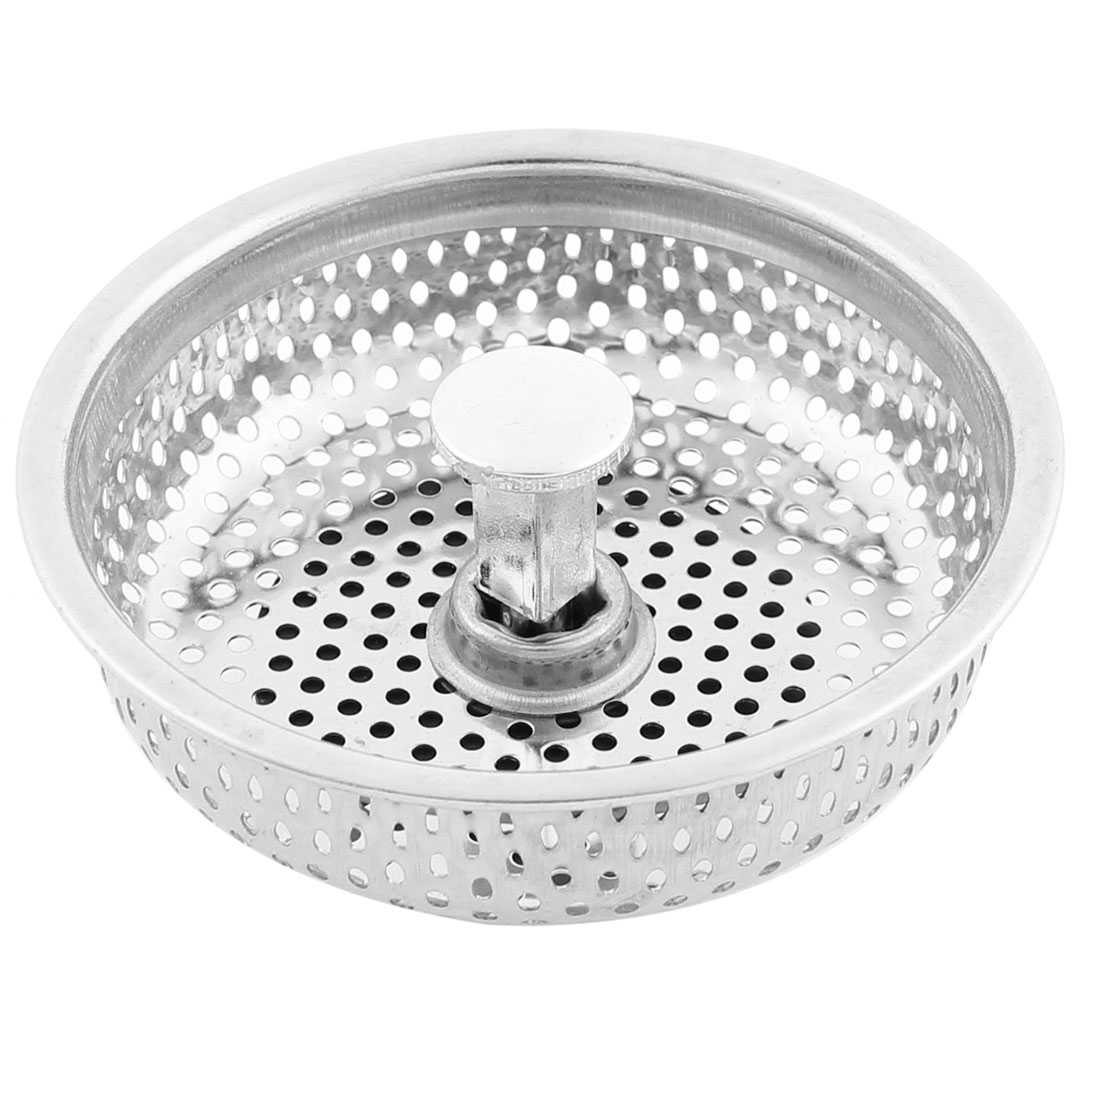 Unique Bargains Kitchen Stainless Steel Water Sink Filter Stopper 83mm Dia Basin Strainer